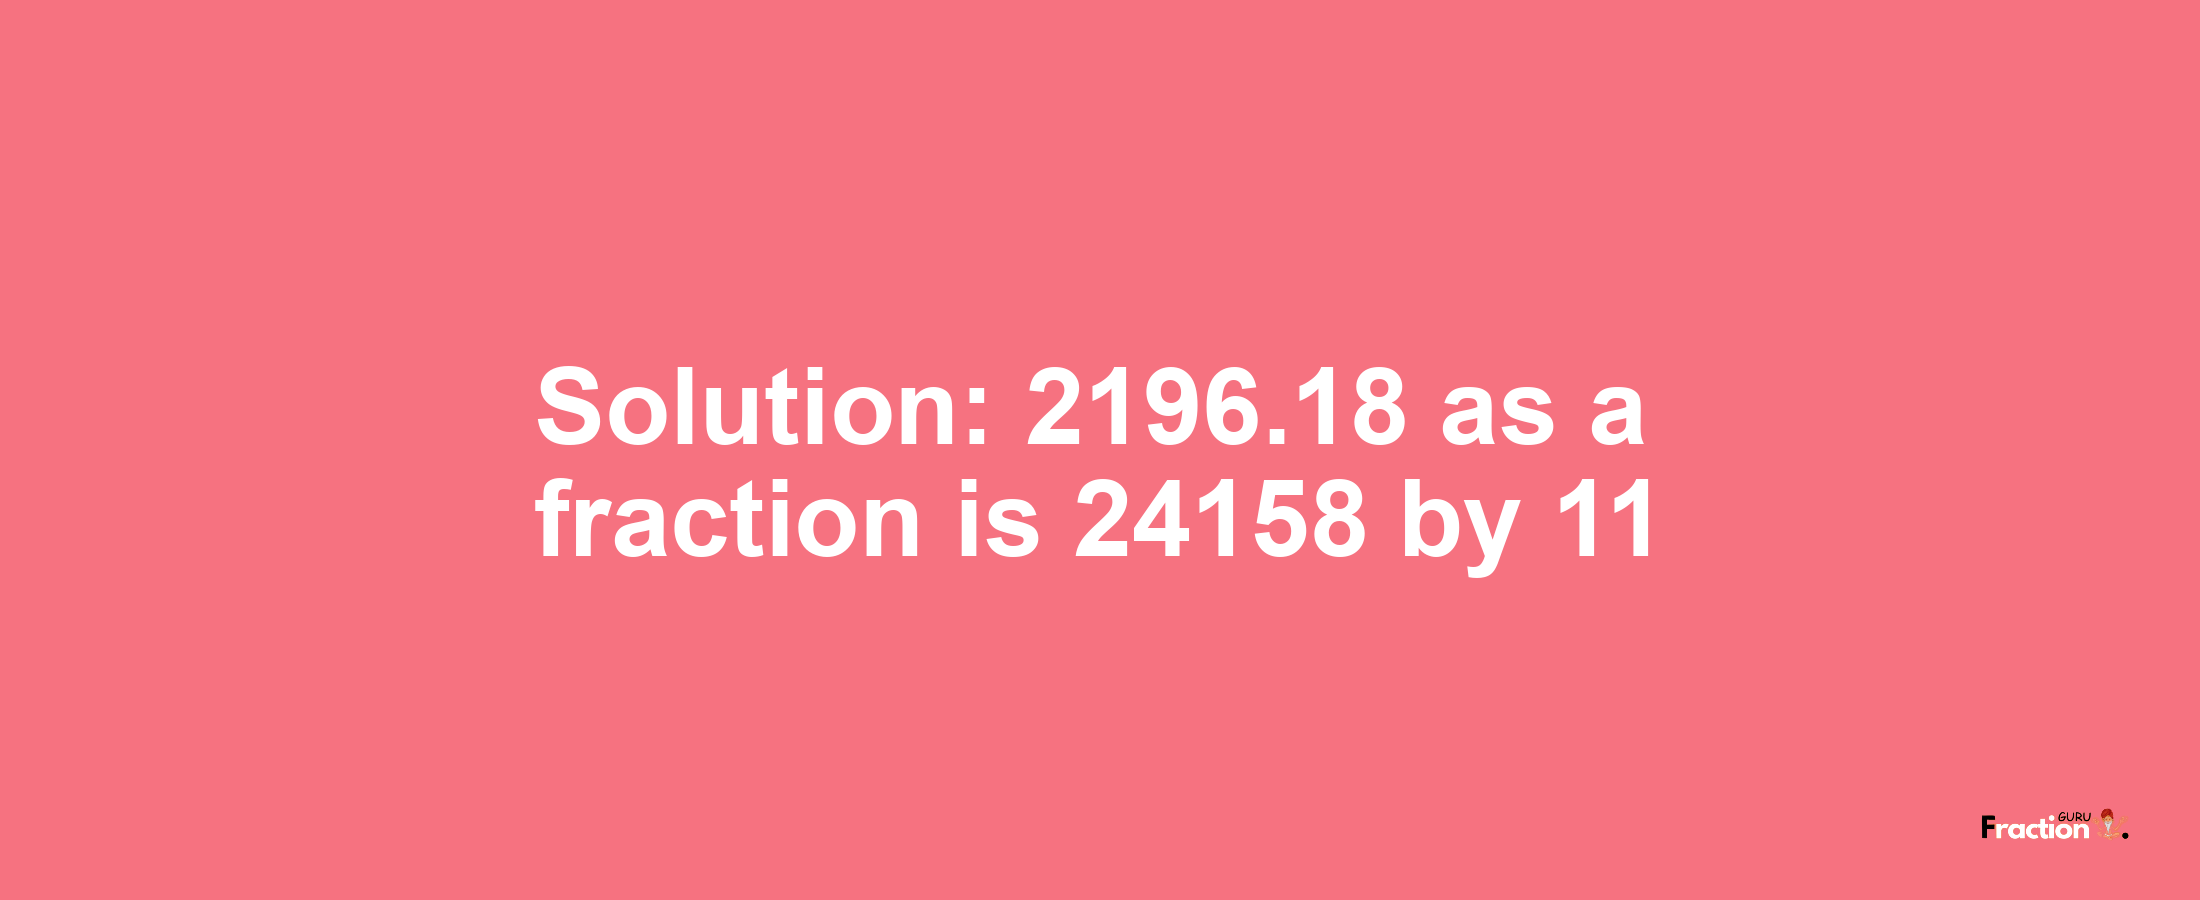 Solution:2196.18 as a fraction is 24158/11